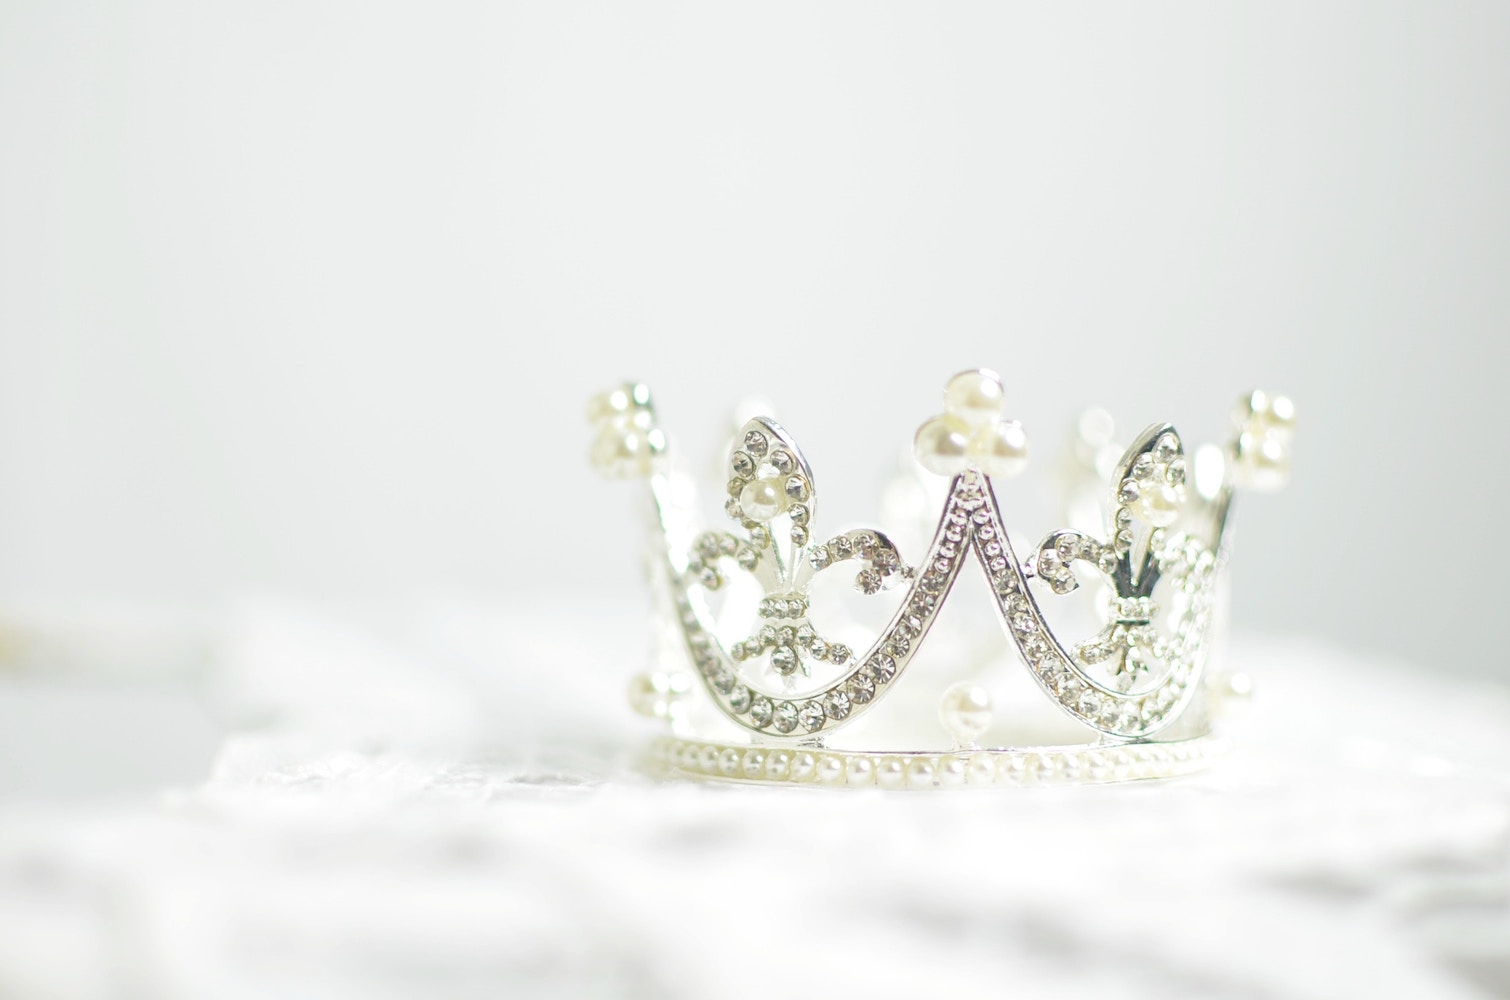 A picture of a crown